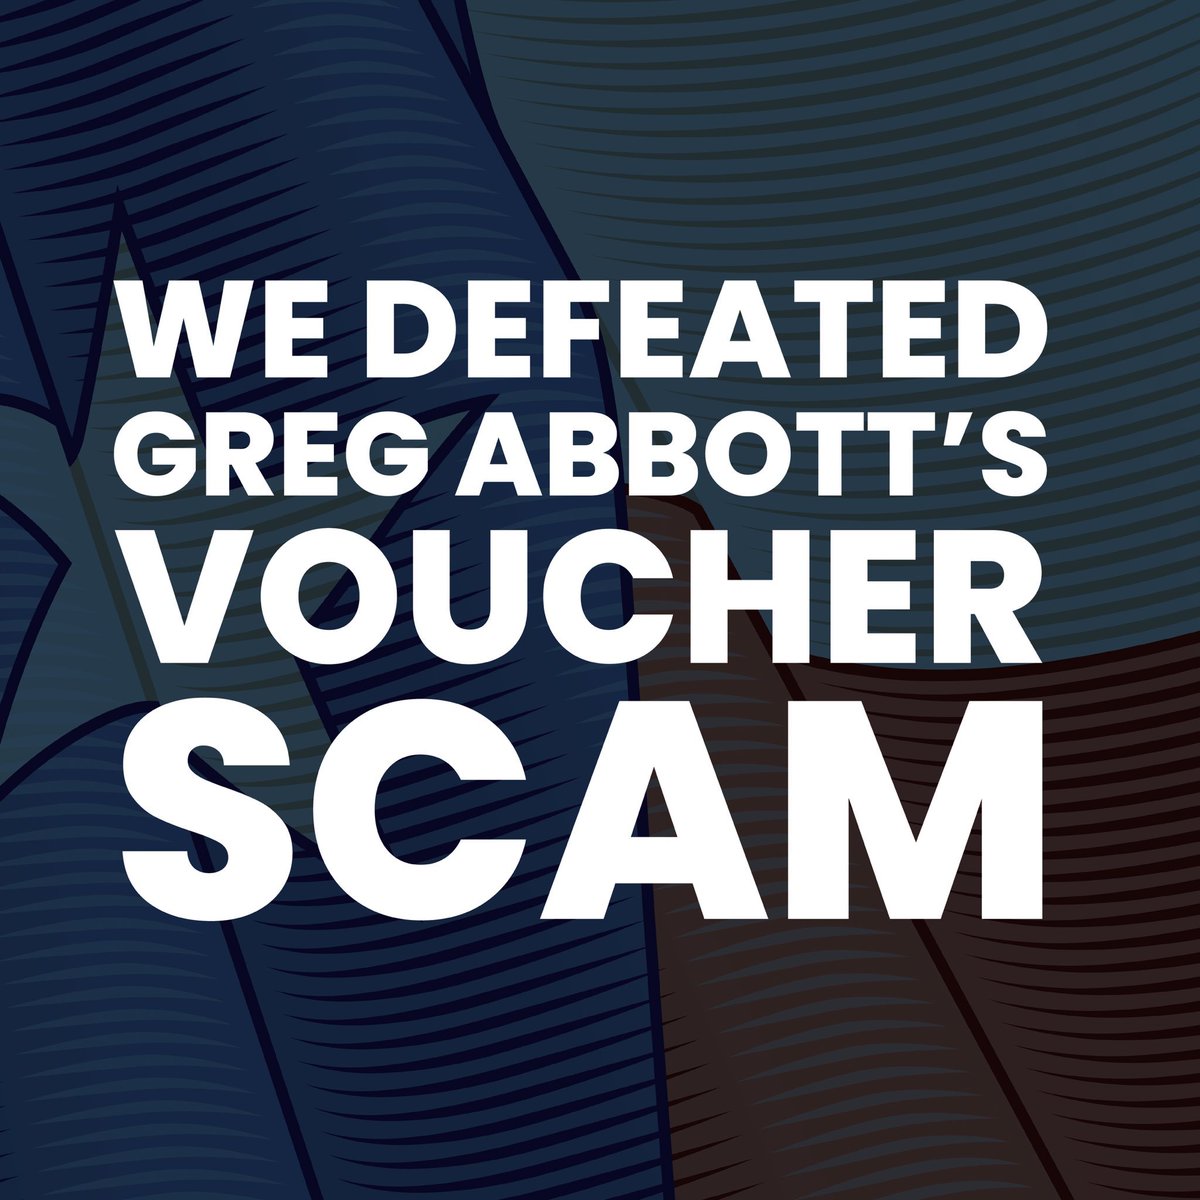 Here’s what tonight’s primary election results mean: Michigan’s @BetsyDeVos can spend $100 million to defeat anti-voucher incumbents, But still lose! In fact, what she and @GregAbbott_TX have done is recruit R’s to vote for pro-#txed D’s in November! No vouchers in TX! Ever!!